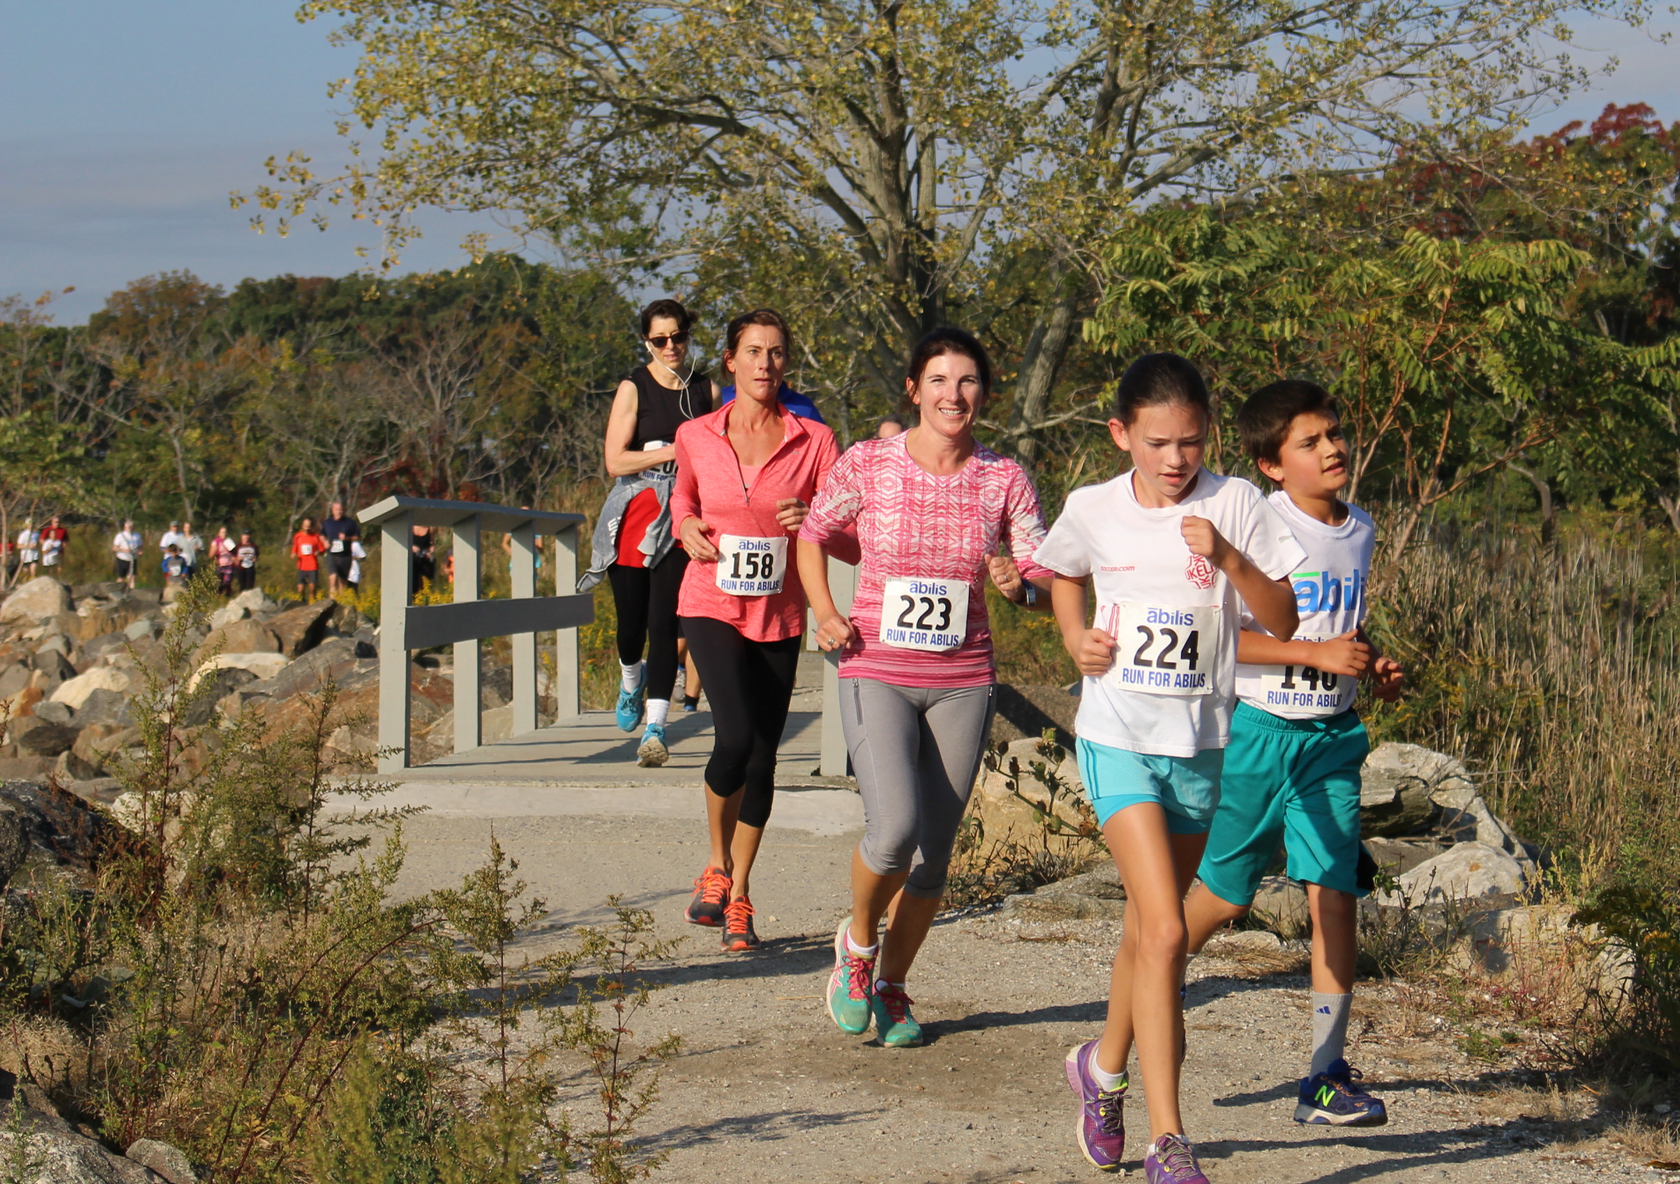 Despite a small detour caused by a super high tide, the runners in the inaugural Abilis 5K run enjoyed a scenic route around Tod's Point, Oct. 16, 2016 Credit: Leslie Yager